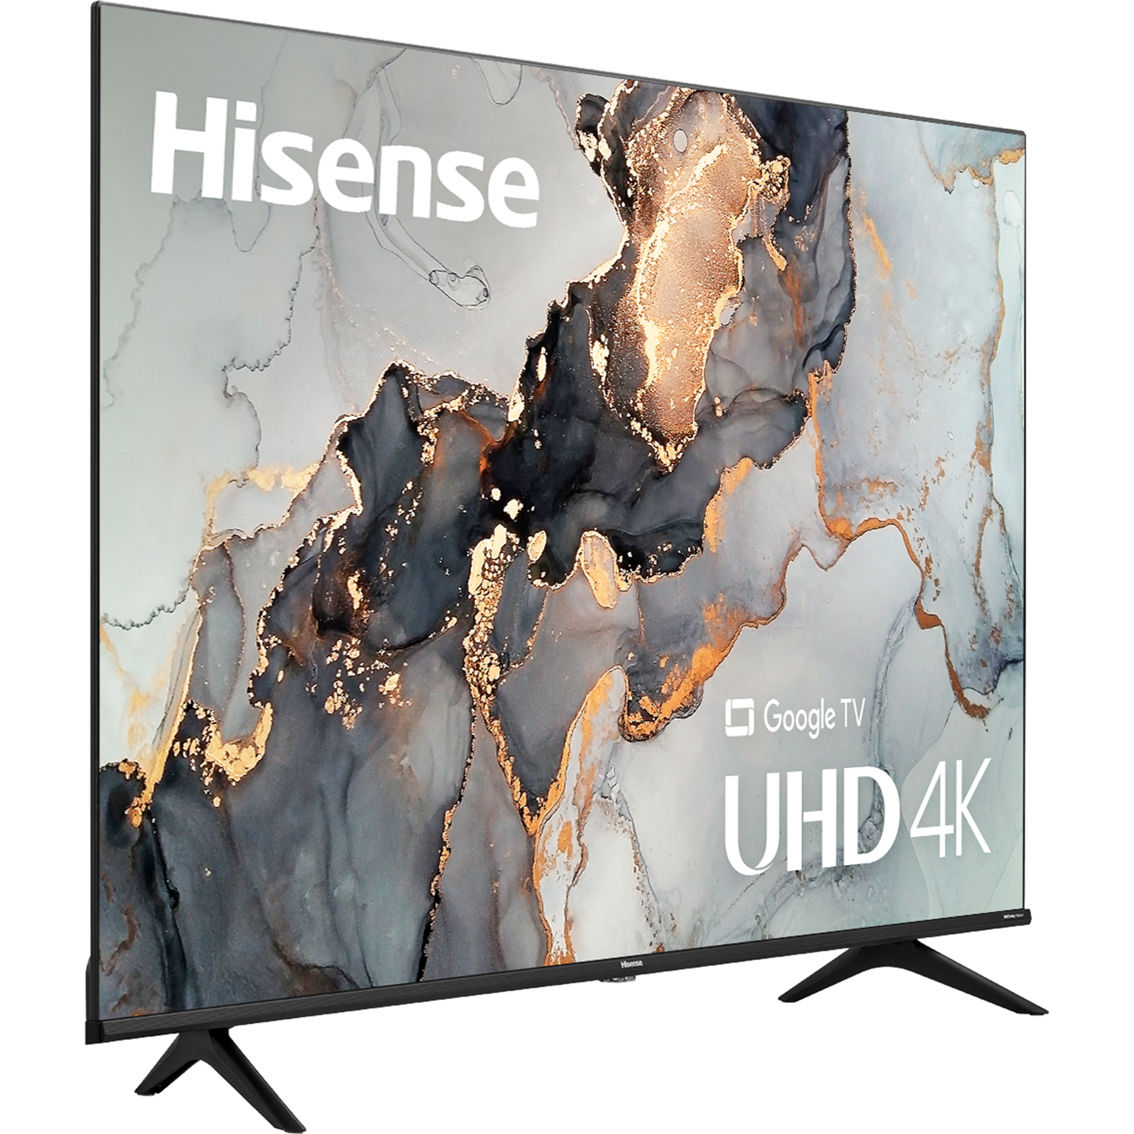 Hisense 55 in. 4K Ultra HD Google TV with Game Mode Plus and Google Assistant - Image 3 of 3